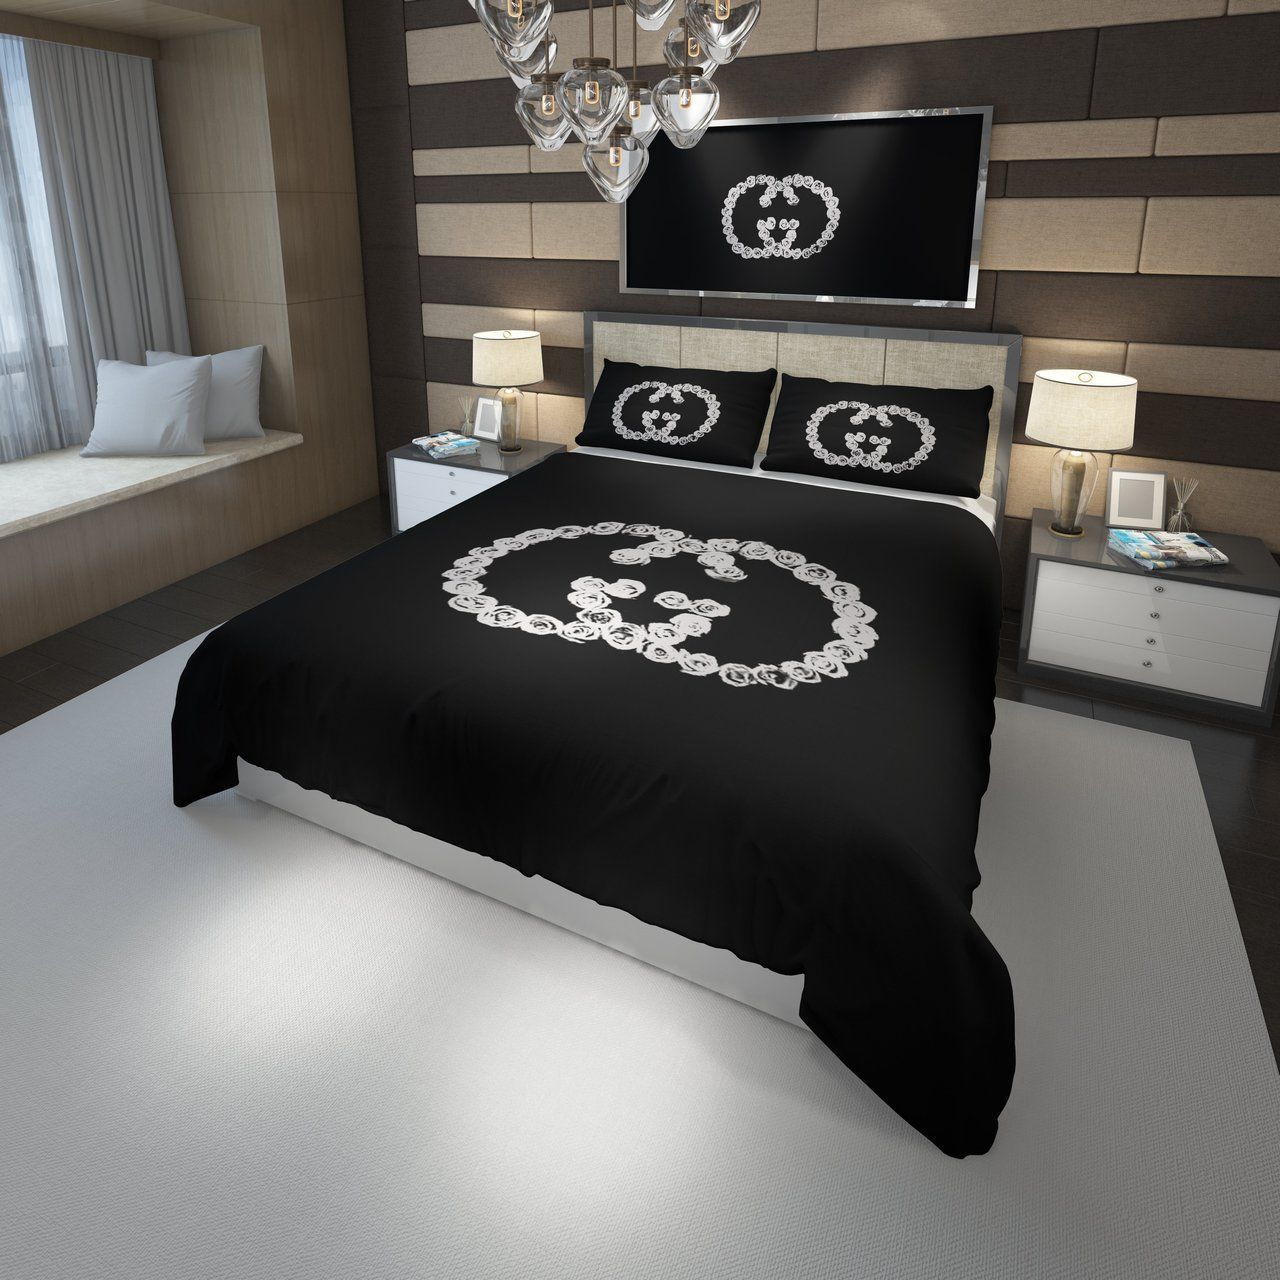 Let me show you about some luxury brand bedding set 2022 167